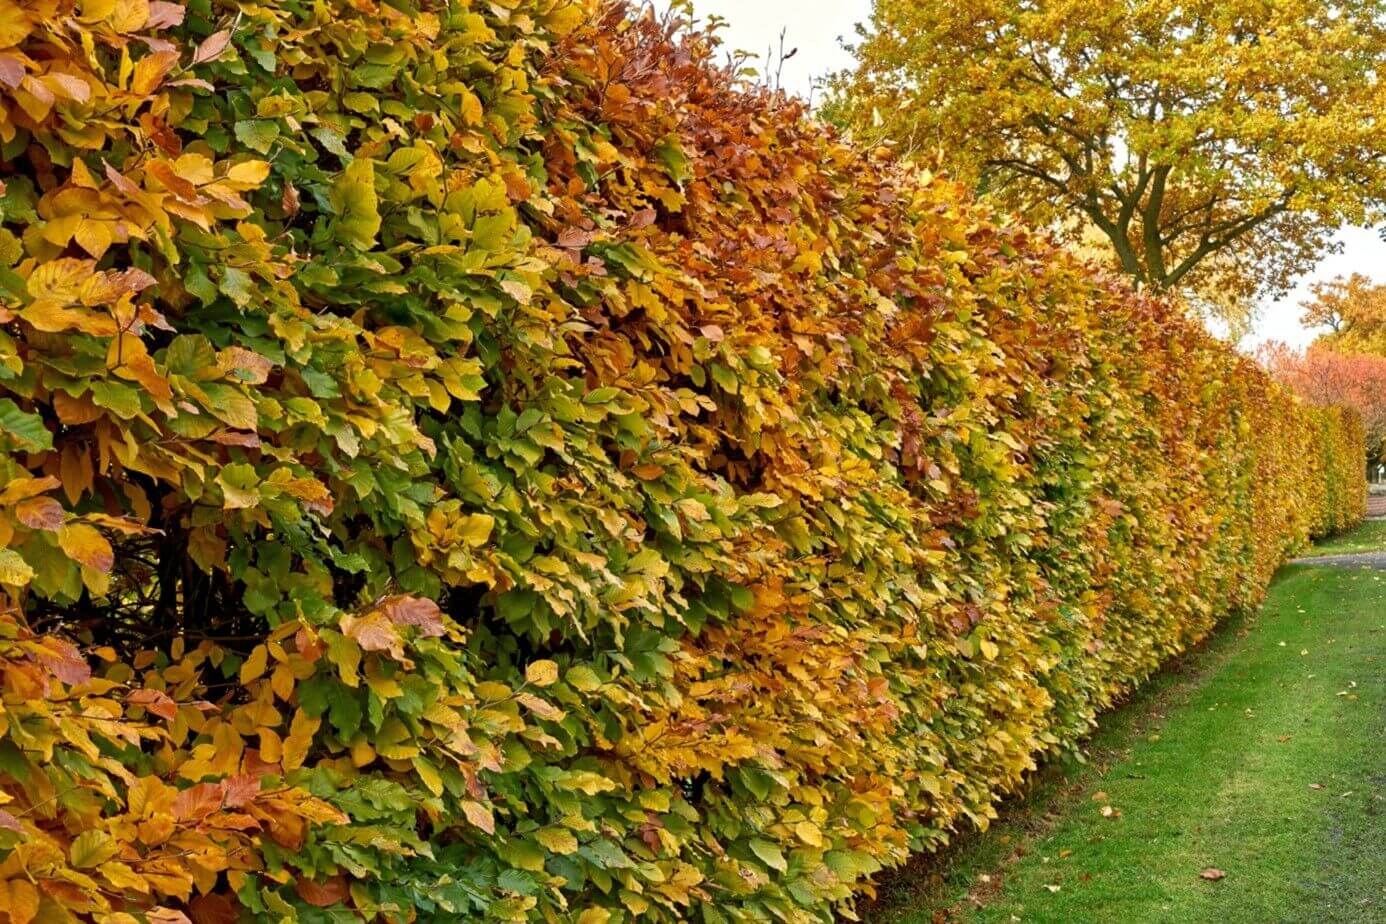 Find the differences between the hornbeam and beech hedge